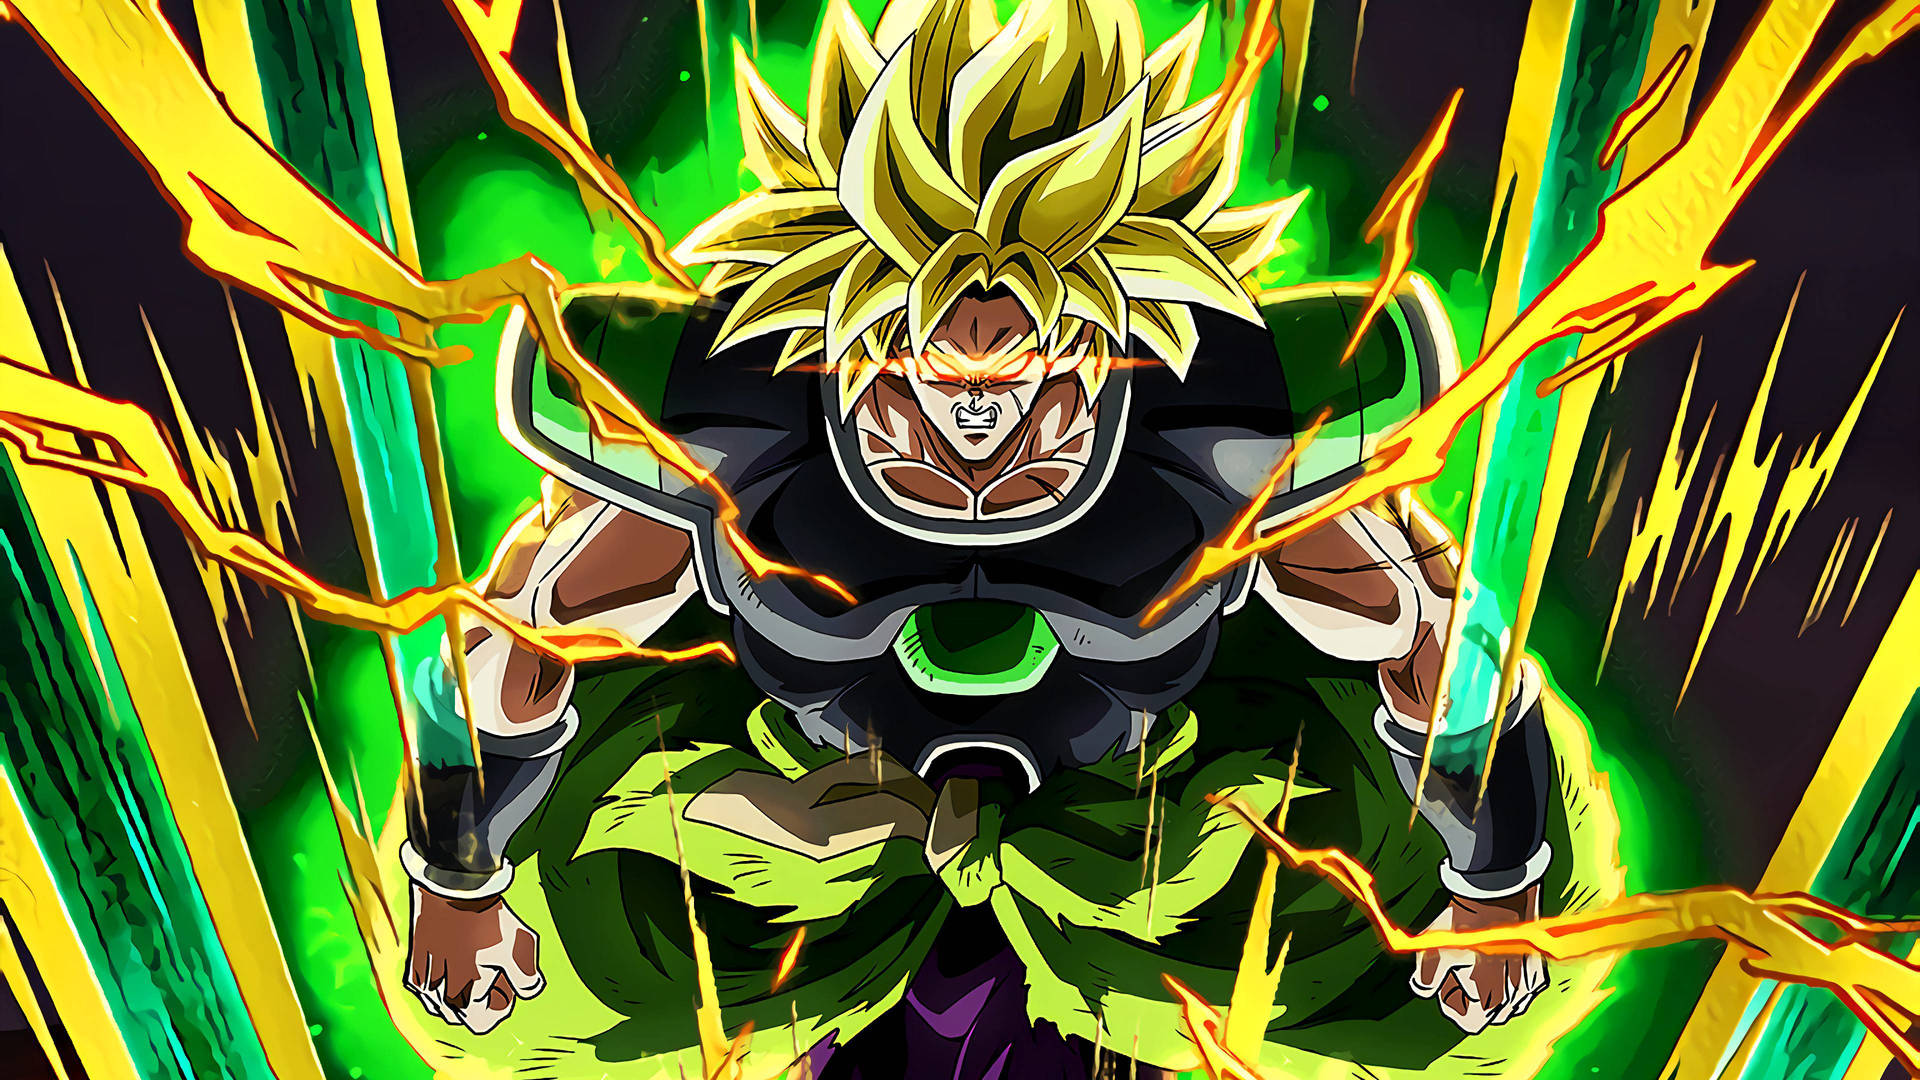 "A Super Saiyan Broly stands with fury in 'Dragon Ball Super Broly'." Wallpaper